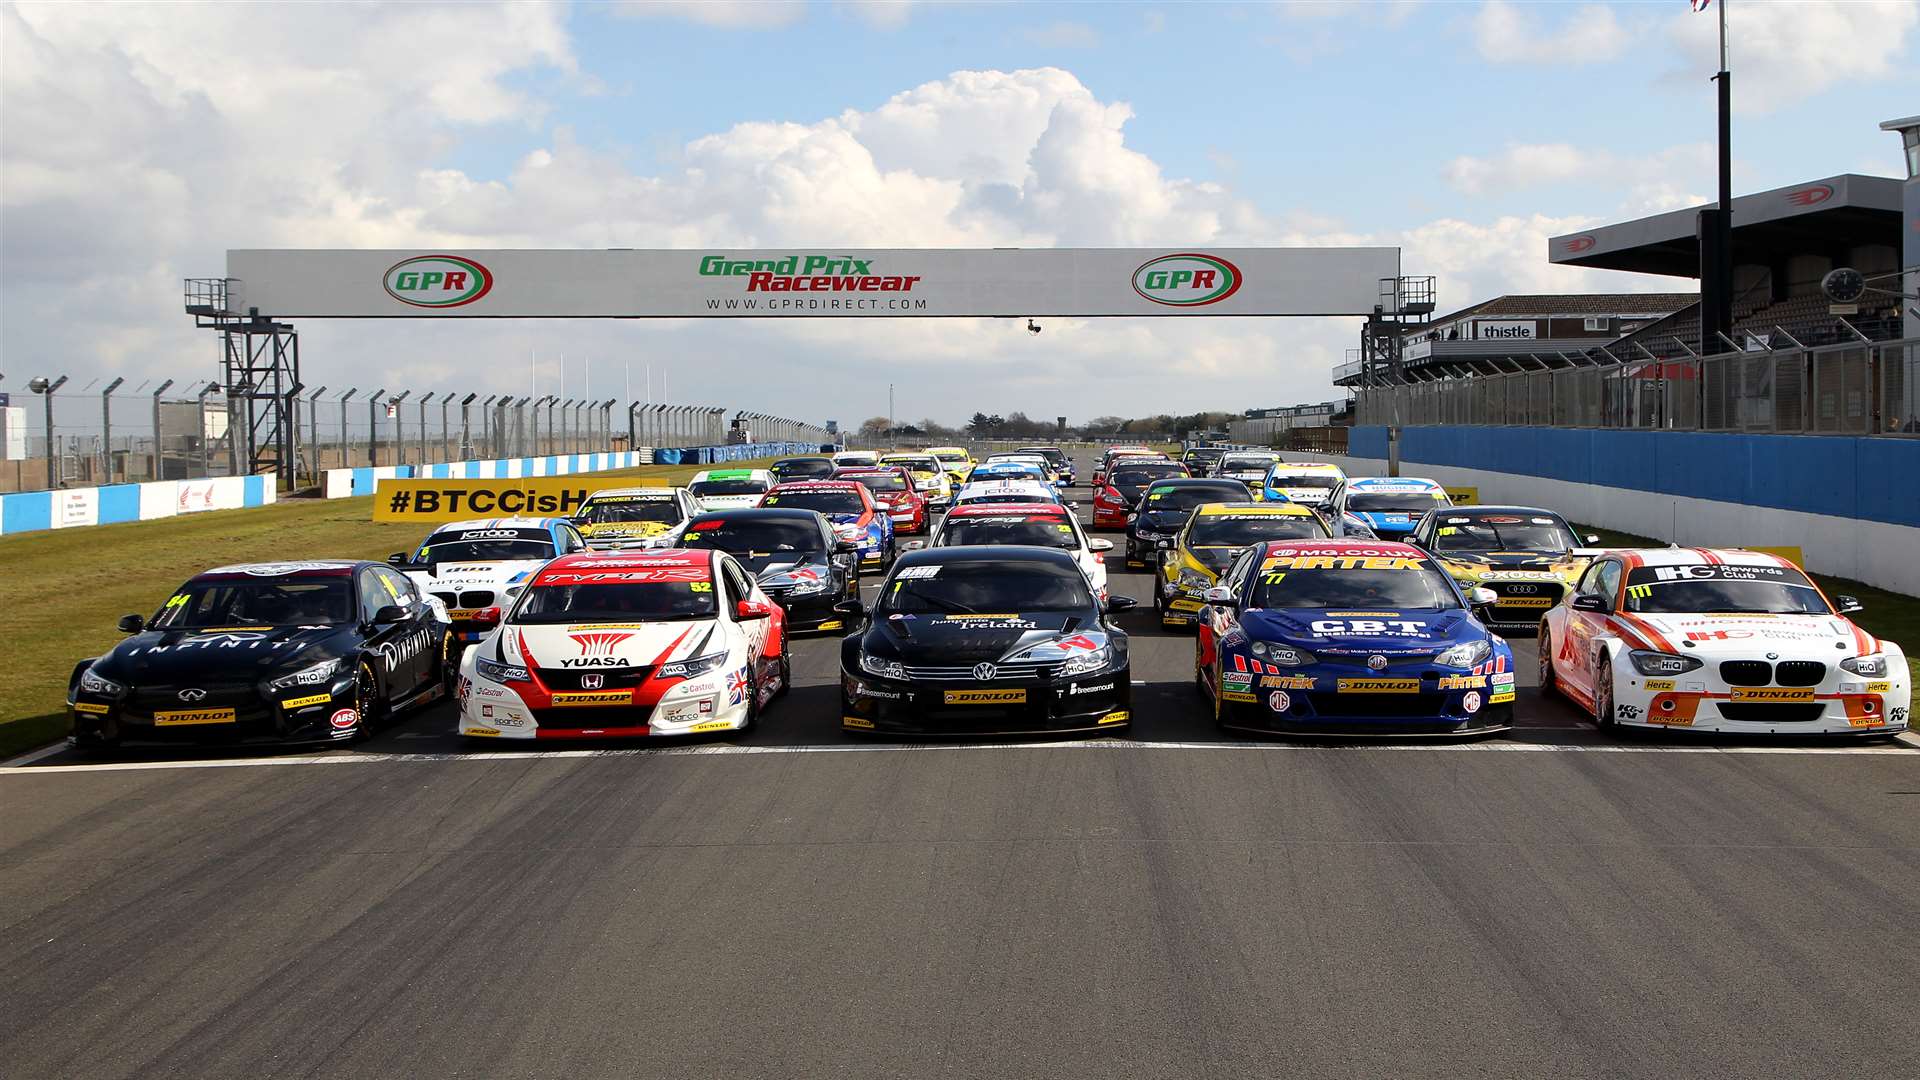 The BTCC has attracted a packed grid for 2015